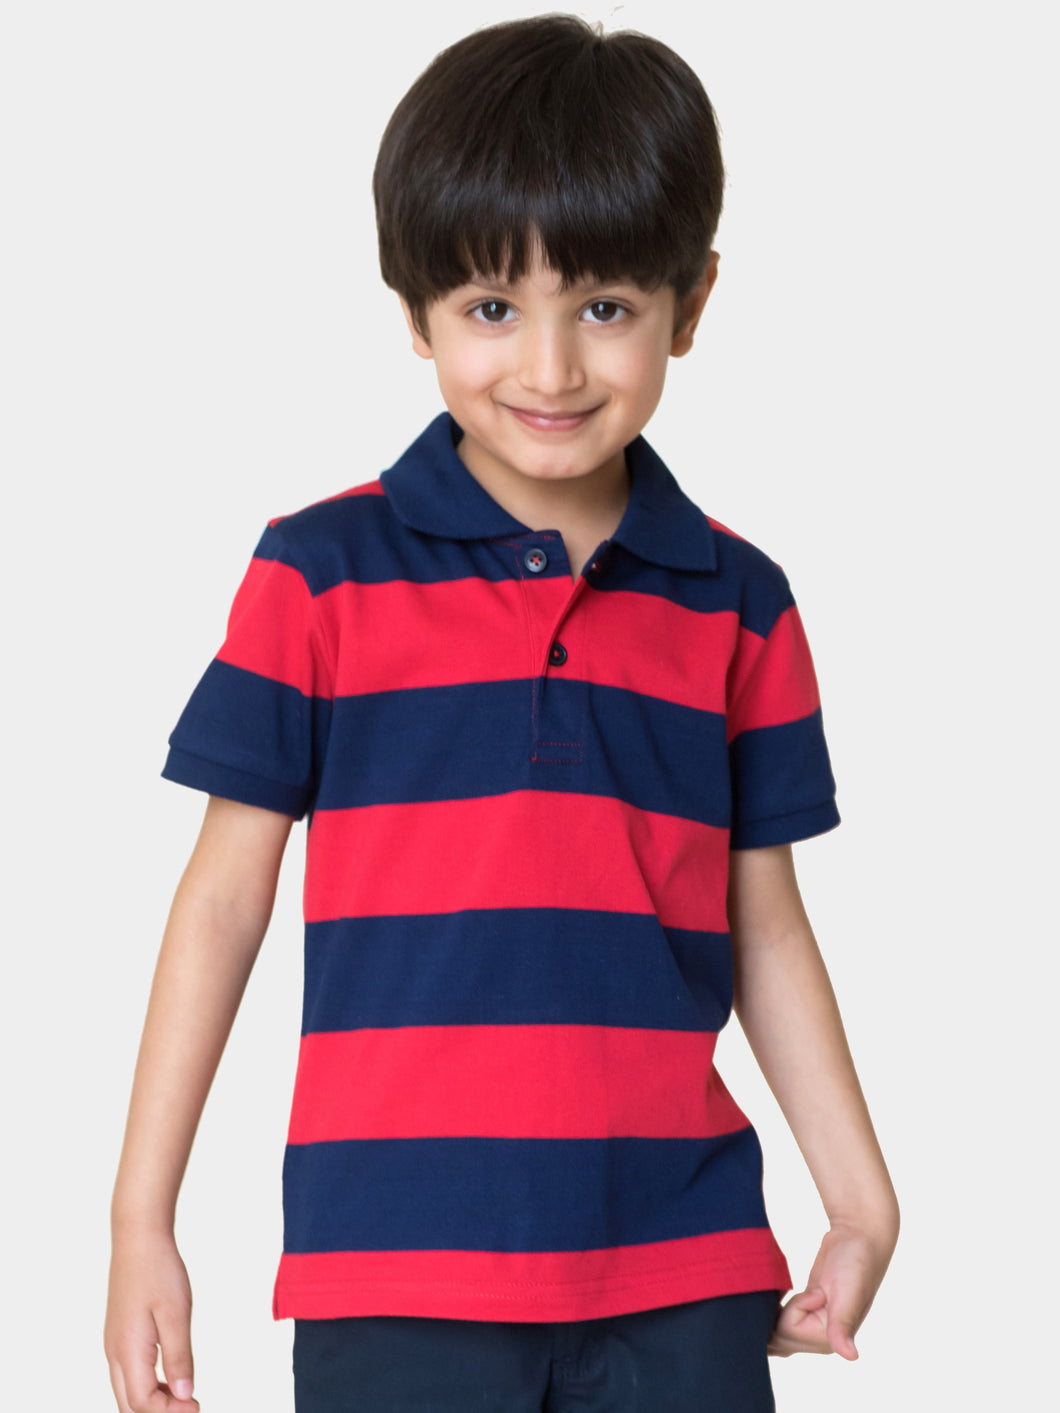 Campana Boys Pablo Short Sleeves Polo T-Shirt - Rugby Stripes - Navy & Red